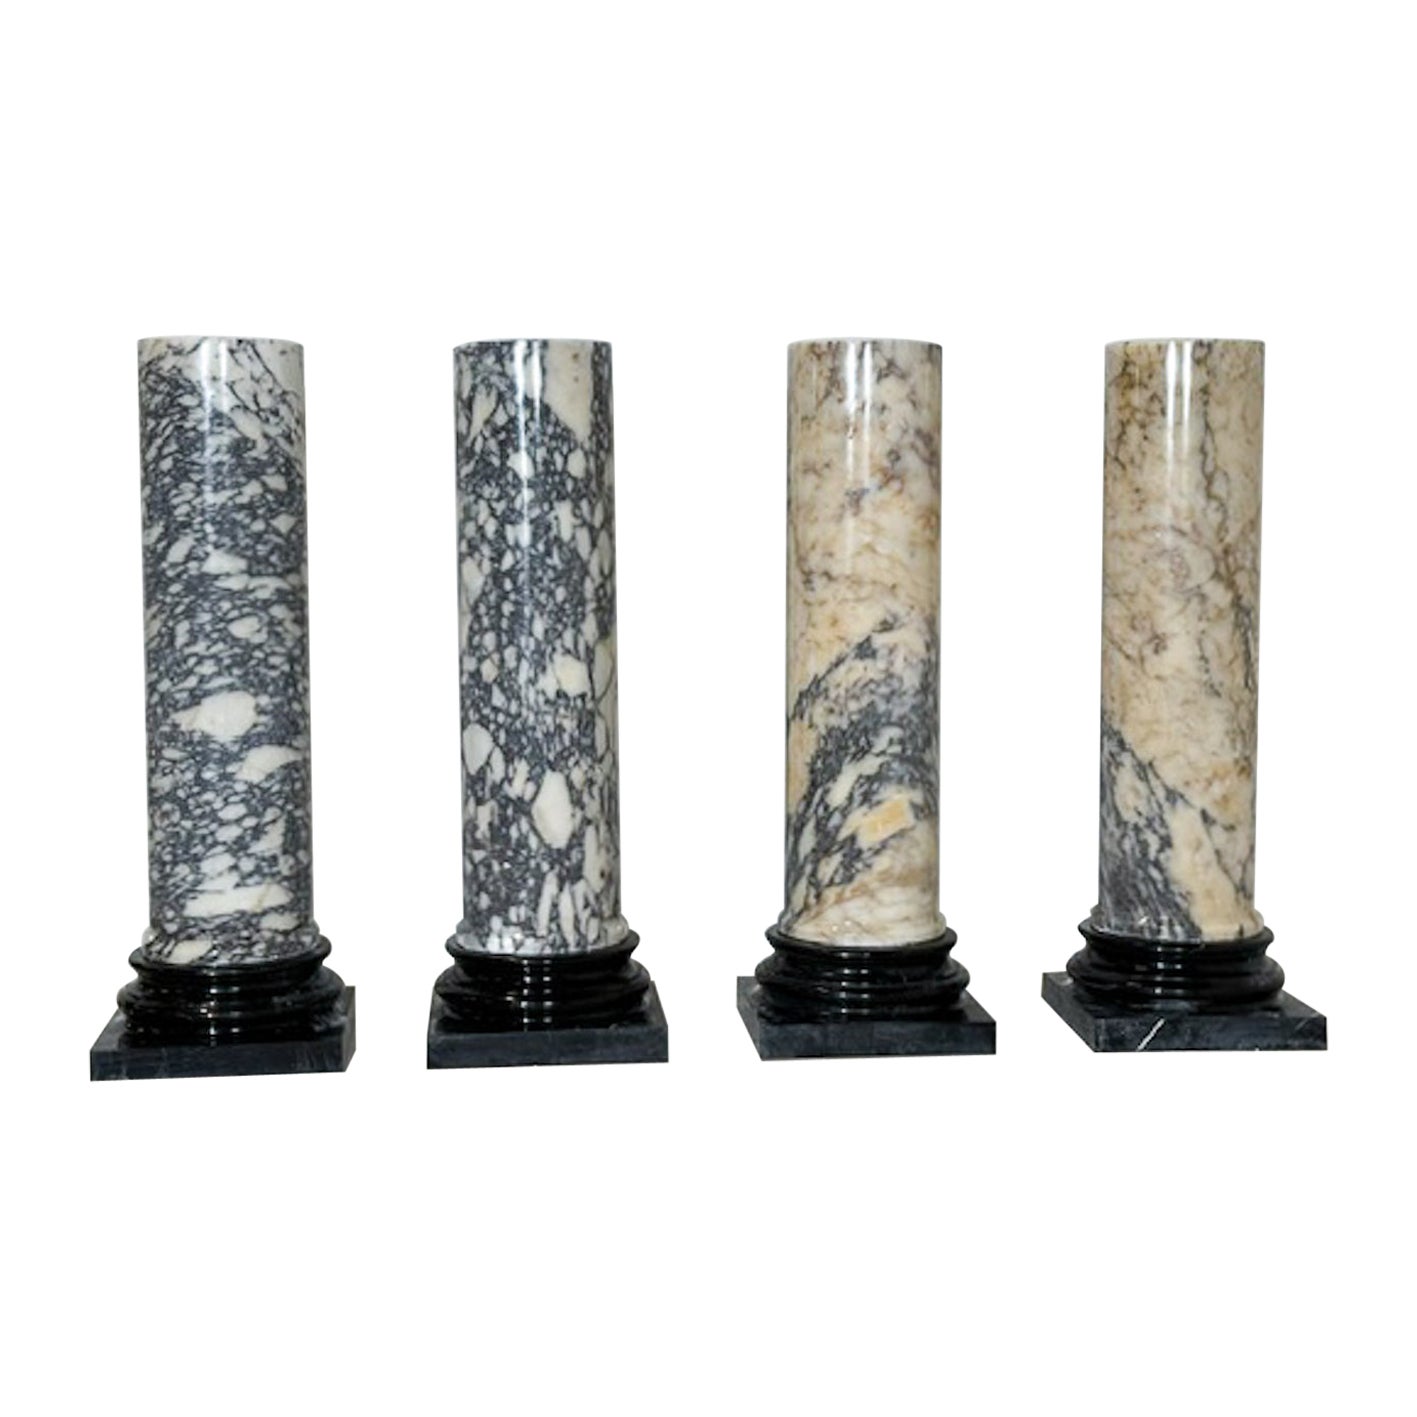 One Pair of Marble Columns, Italy, 1980s - Sold per pair